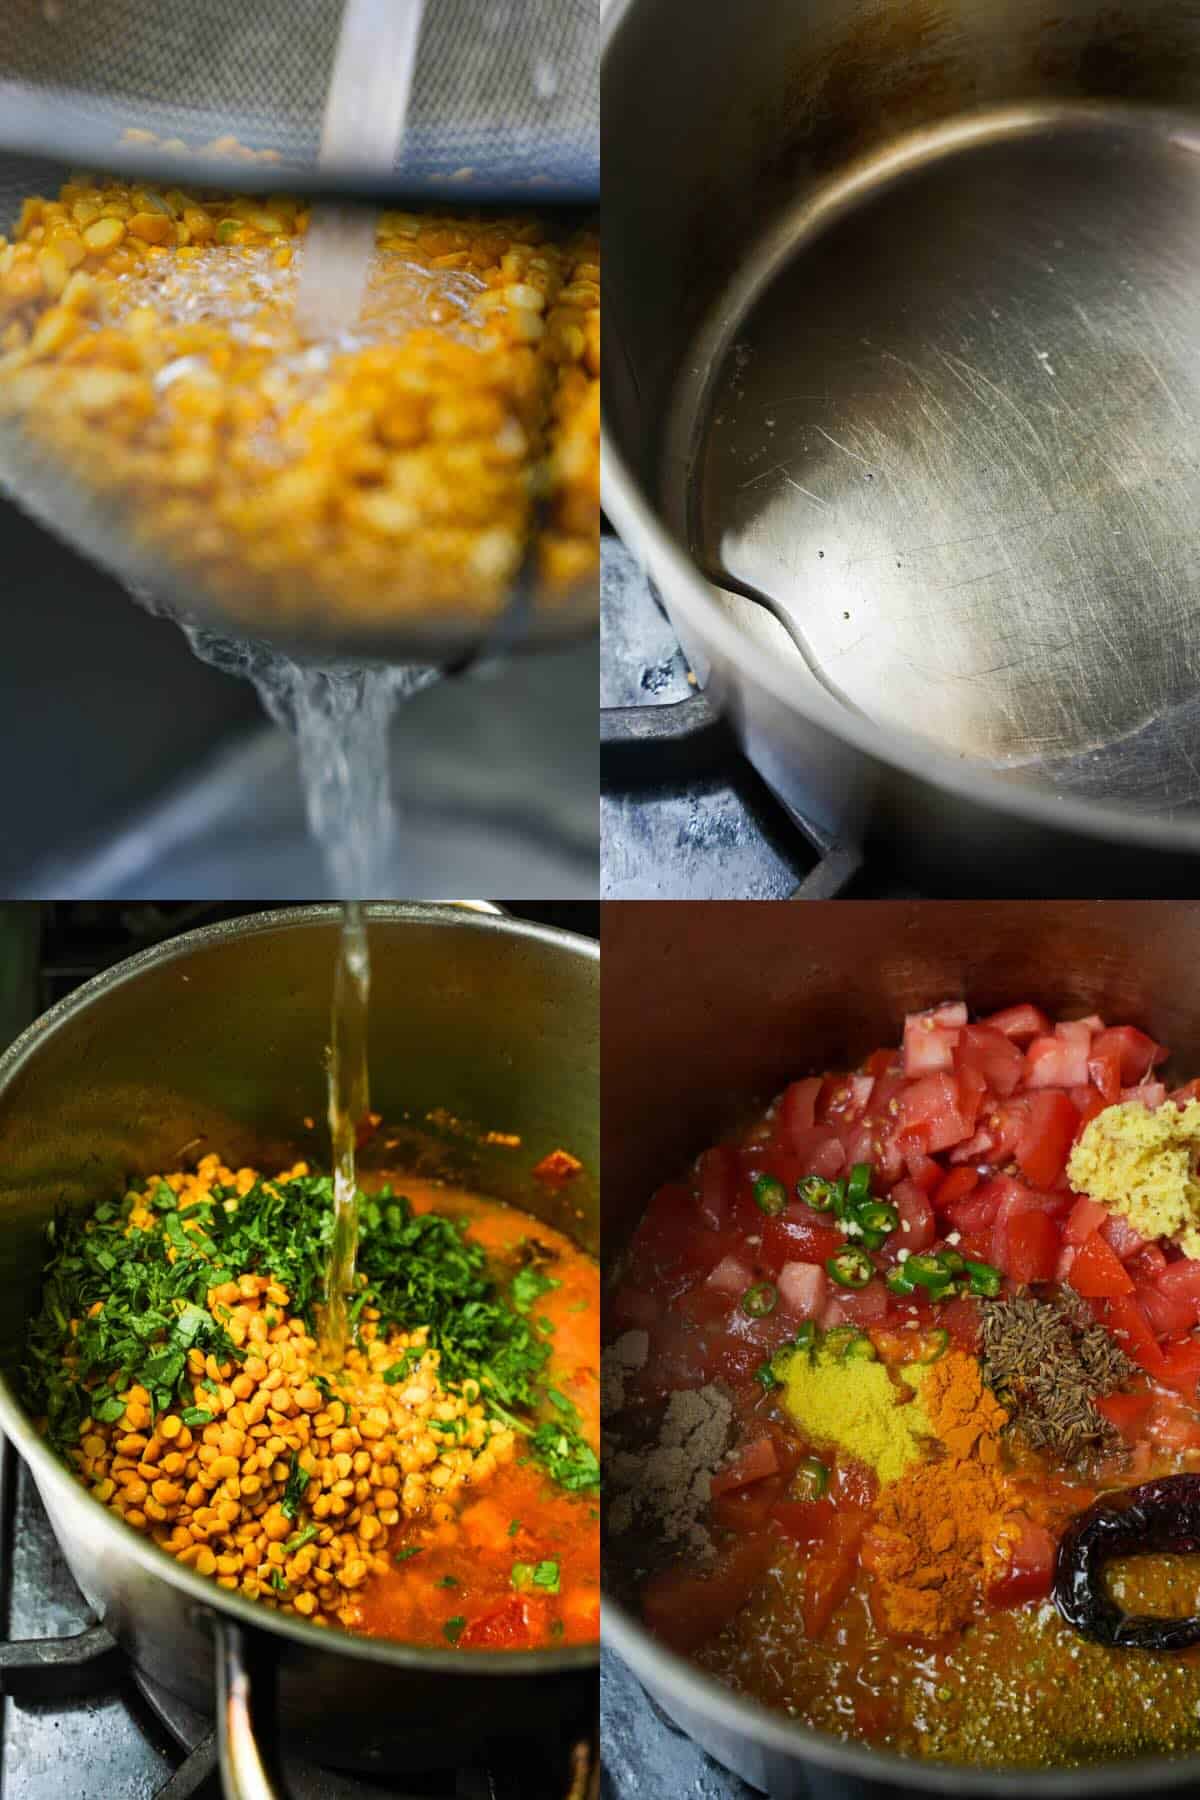 Chana dal being rinsed and cooked with herbs and spices in a pot.